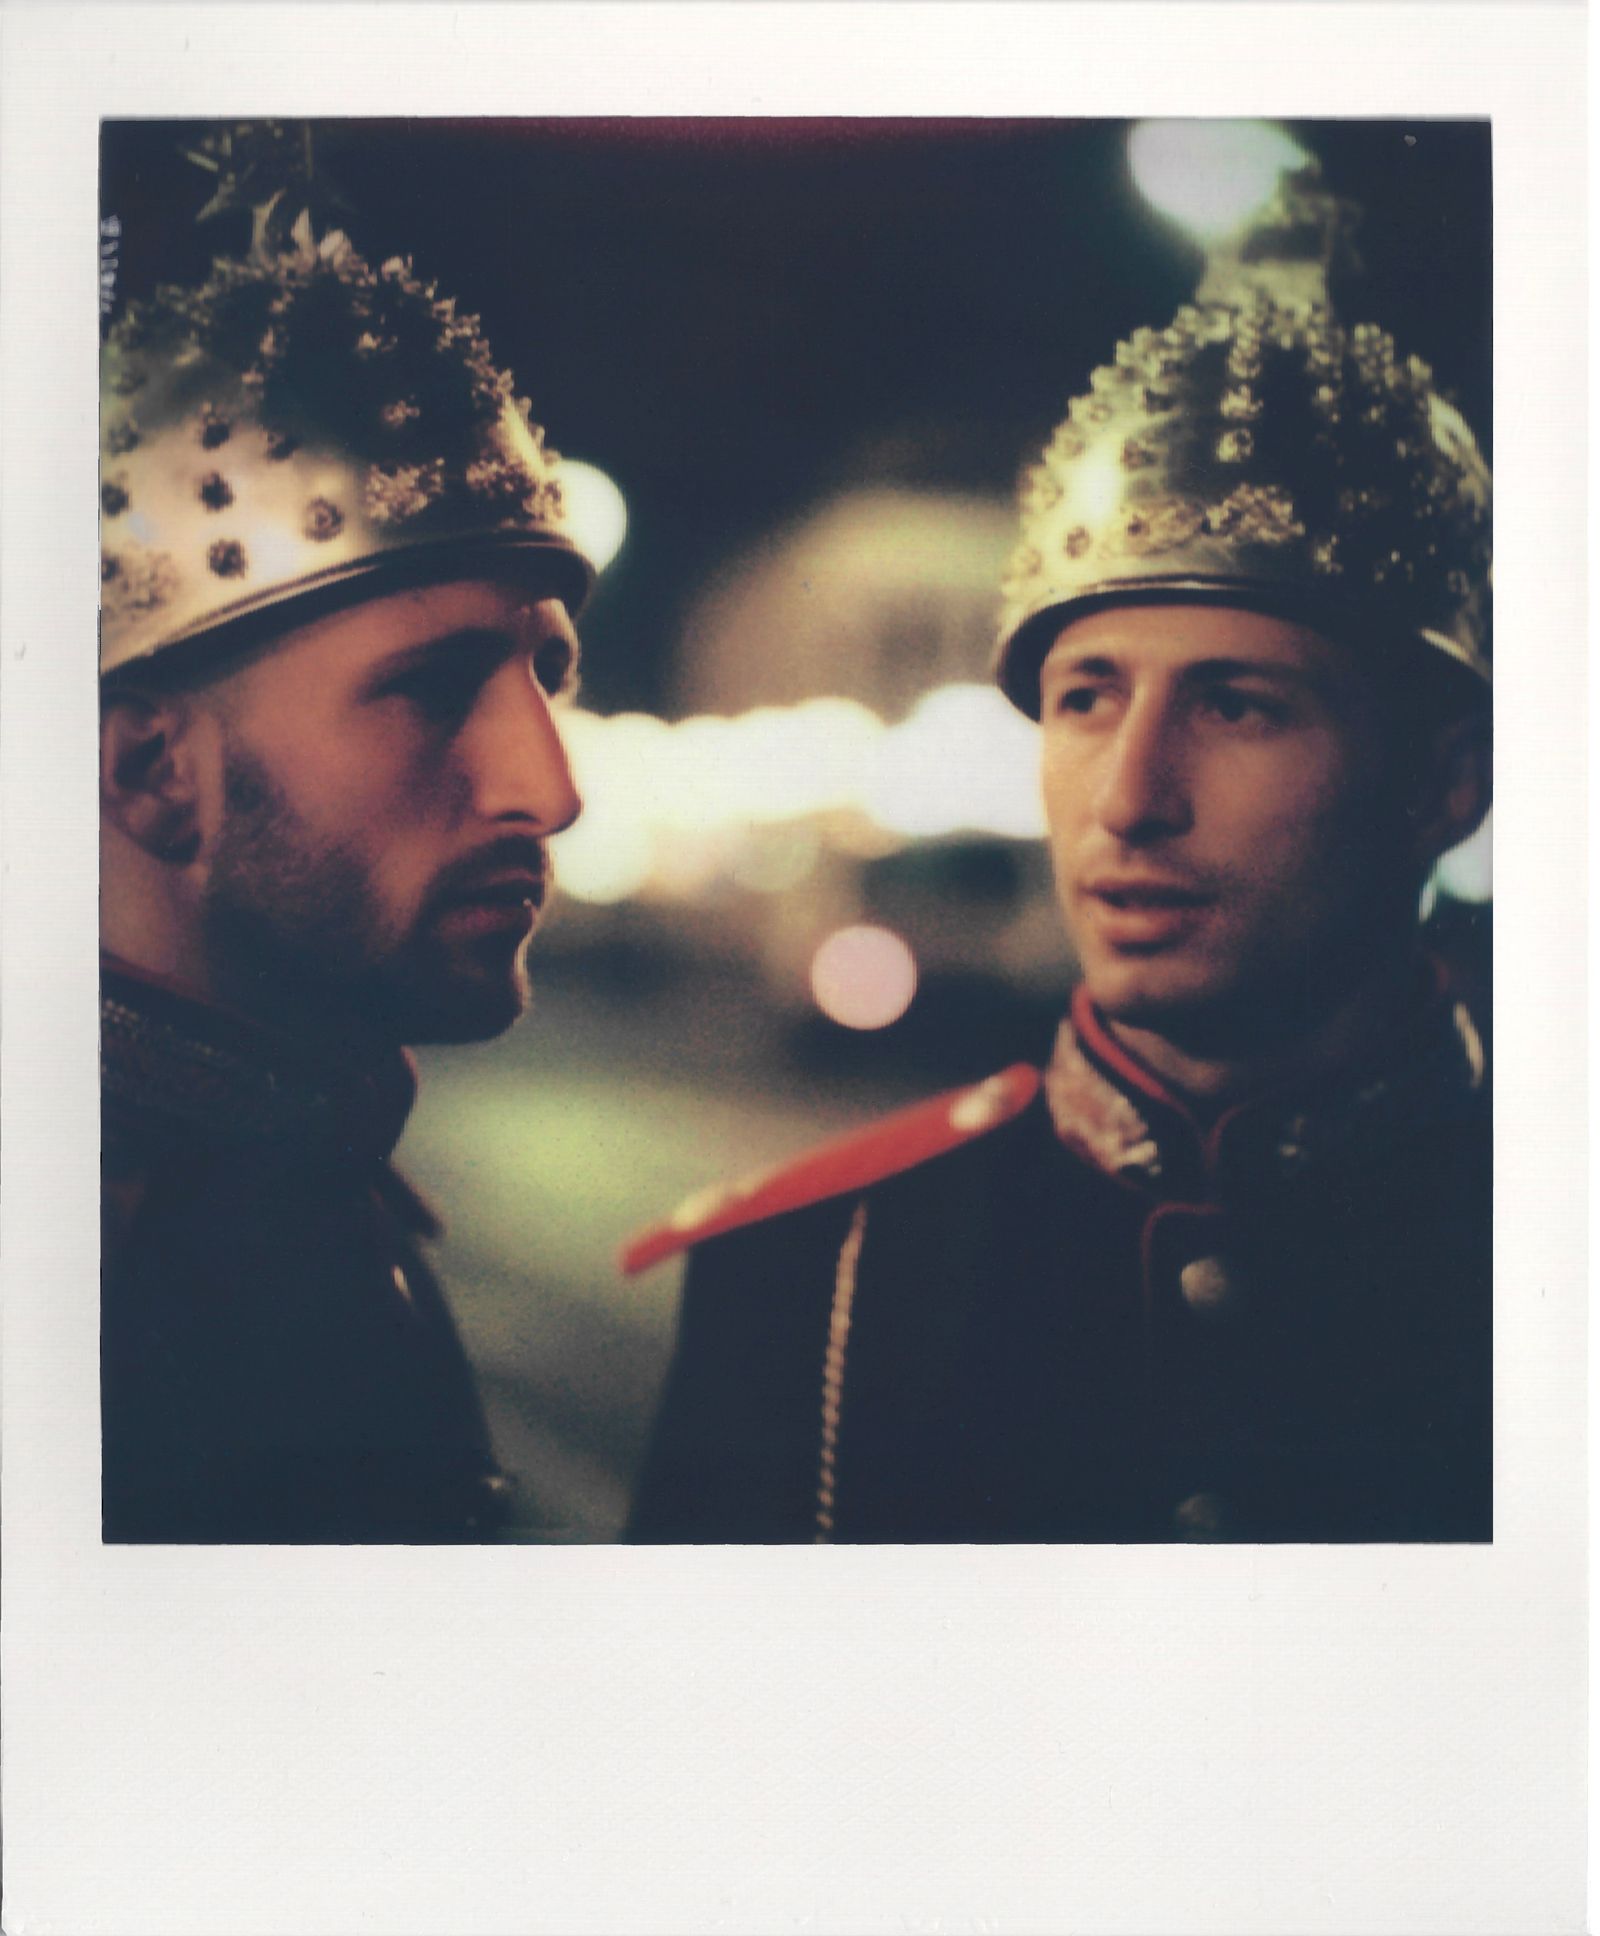 © Sarp Kerem Yavuz - Image from the Polaroids from the Ottoman Empire photography project